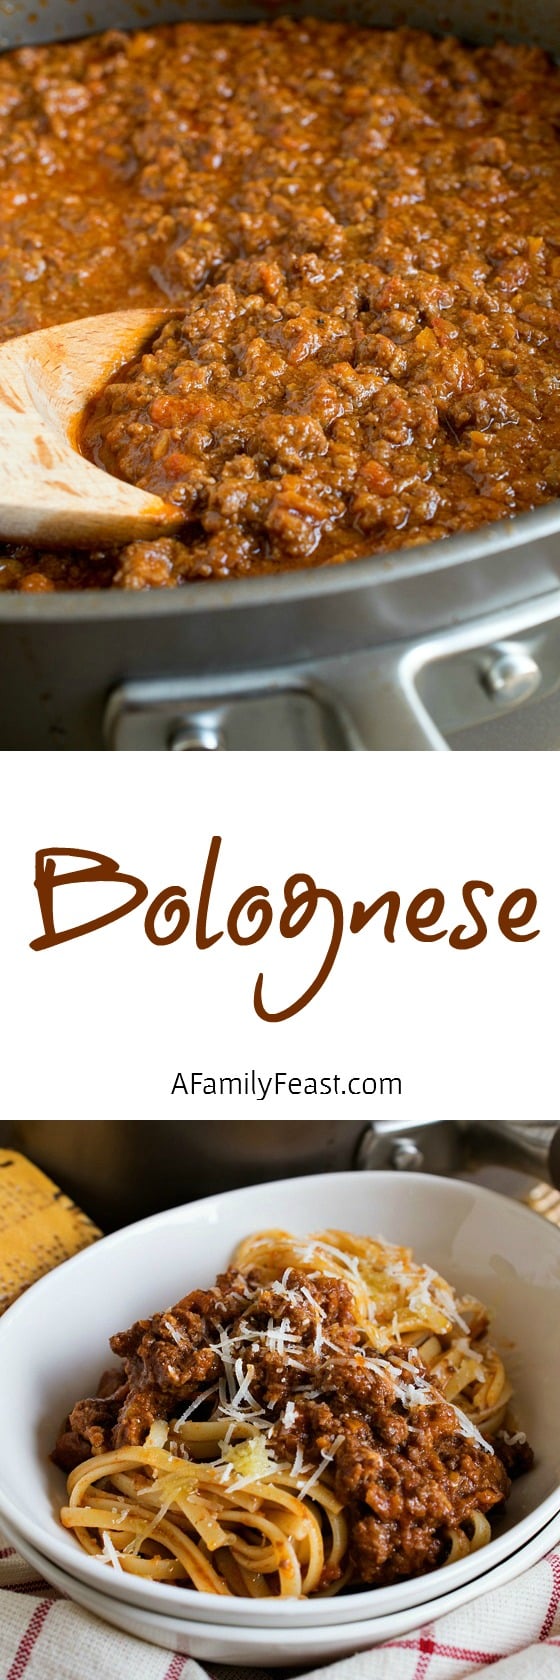 Bolognese - A classic Italian meat sauce with incredible flavor and texture.